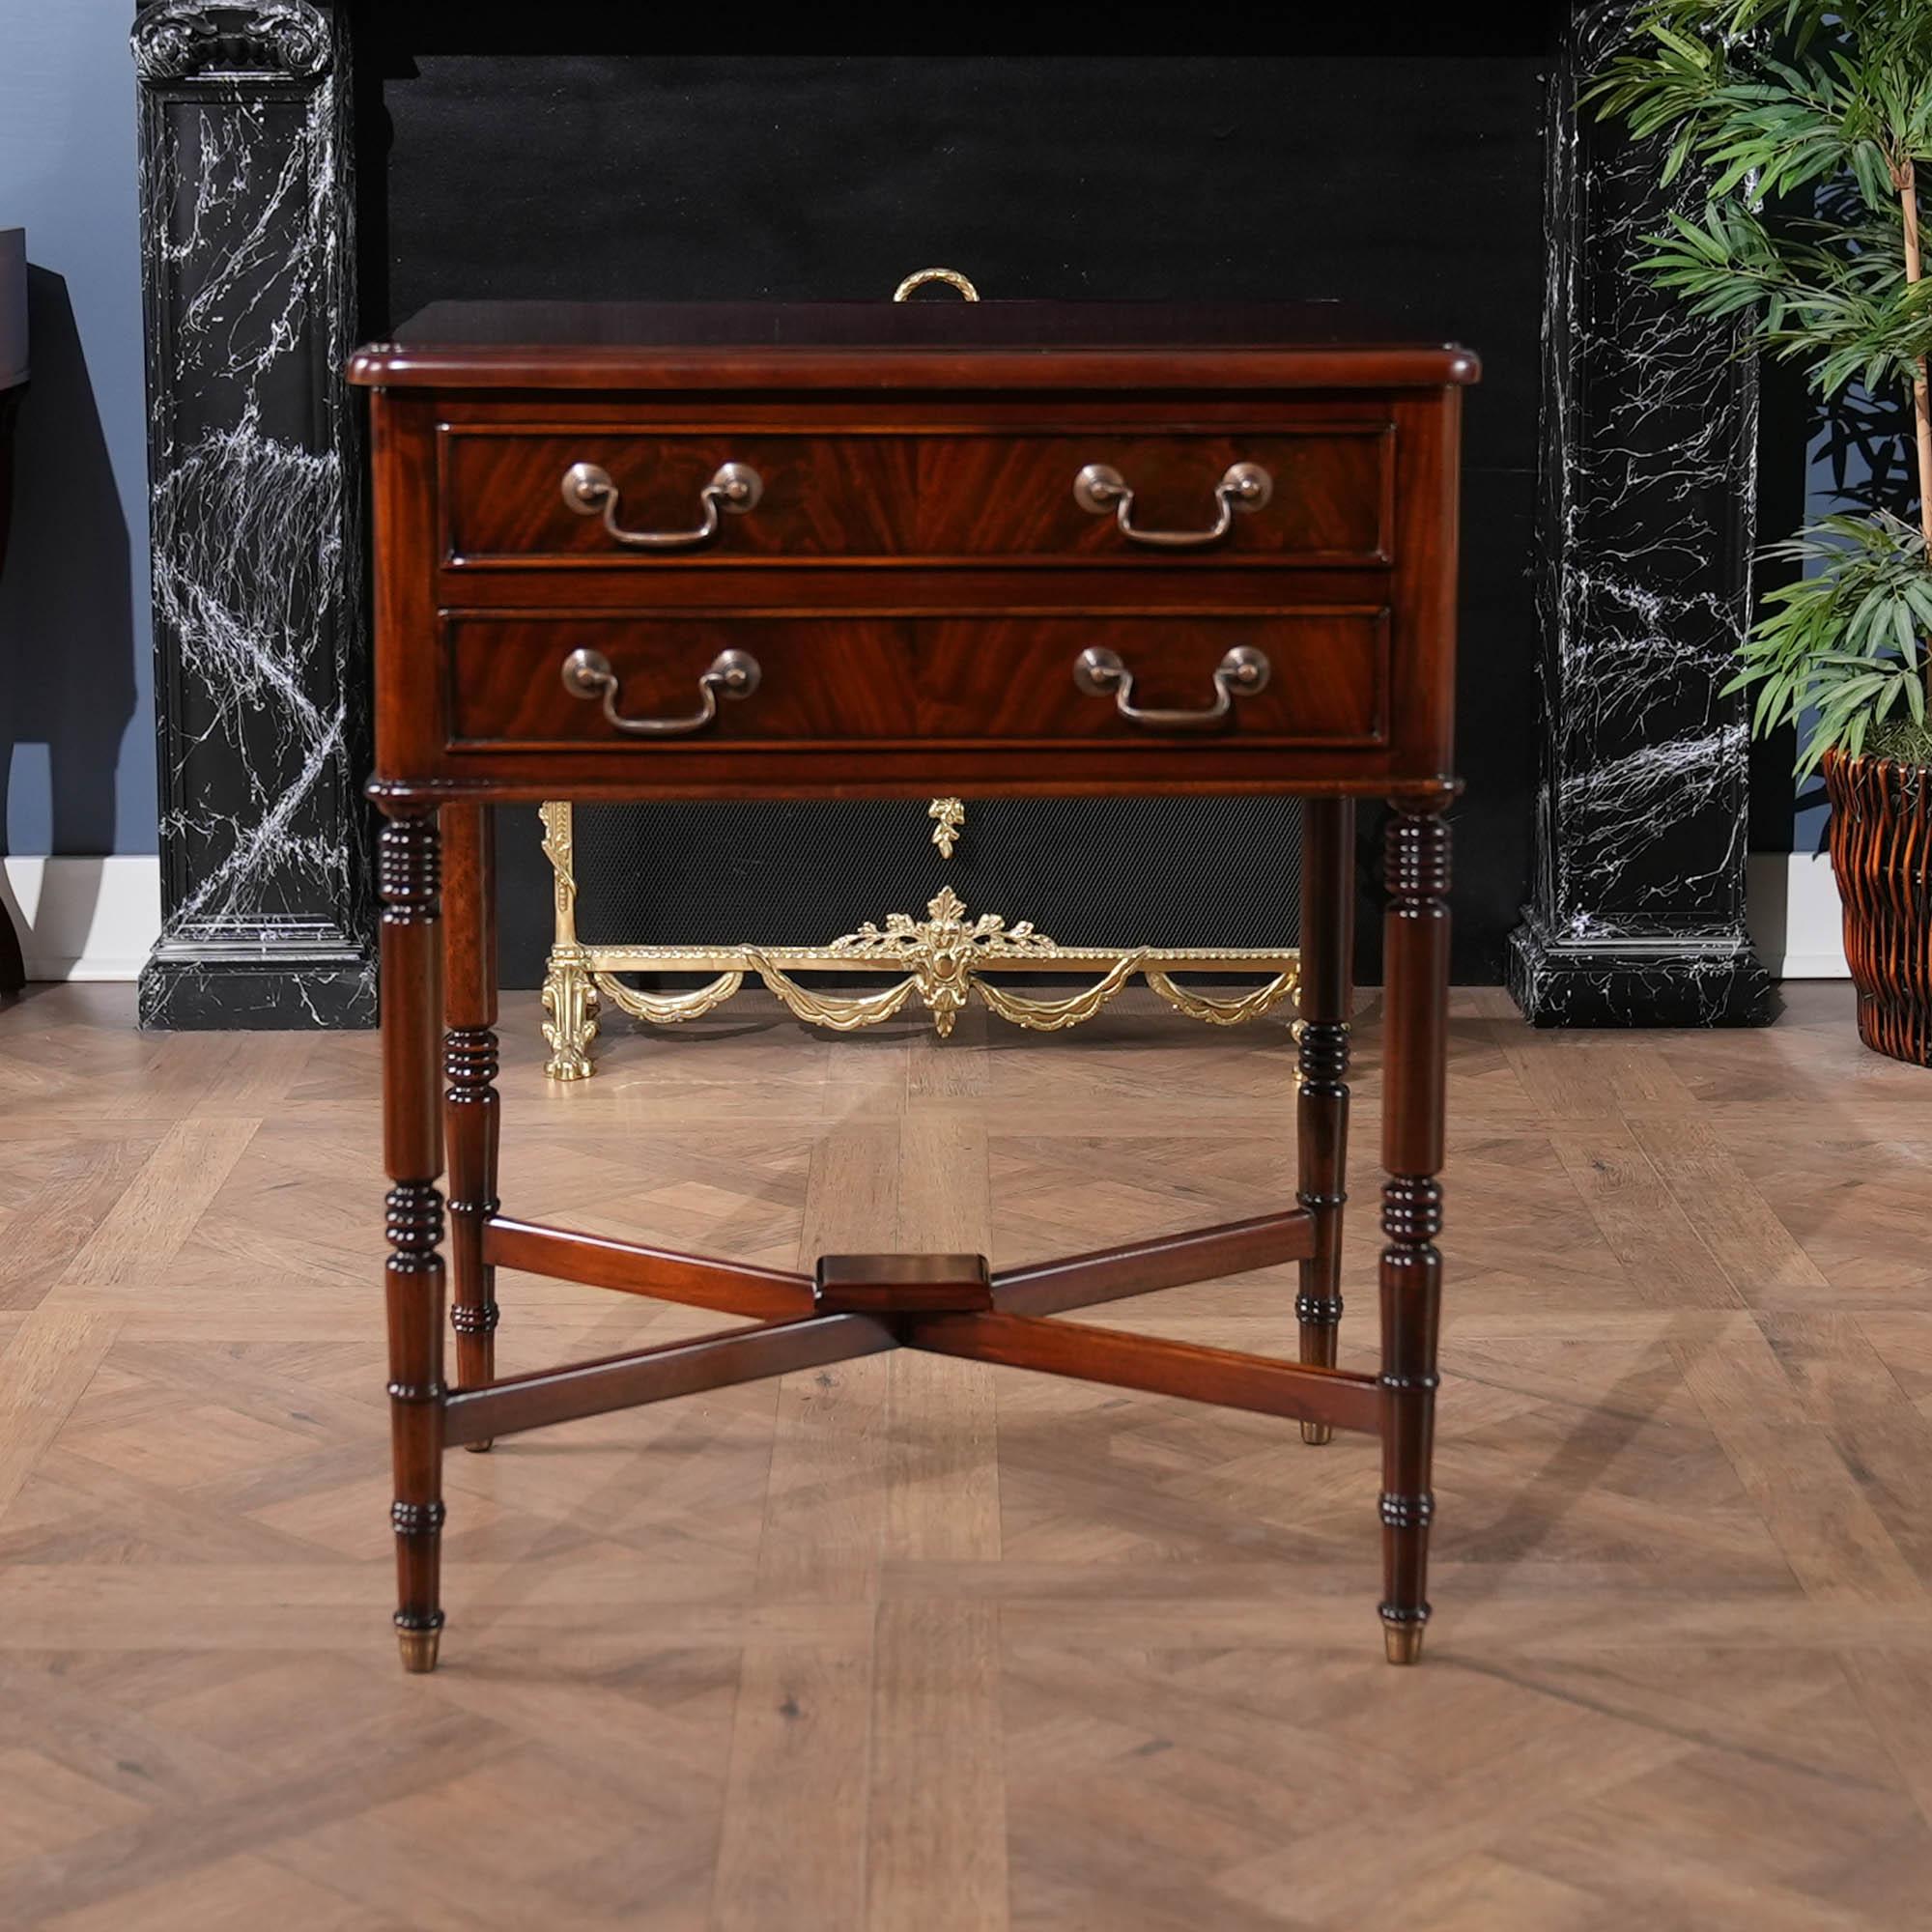 Our two drawer Mahogany Turned Leg Table is based on an antique English design. Our version is slightly larger than the original to allow for modern living spaces. Made from mahogany and mahogany veneers the Mahogany Turned Leg Table features